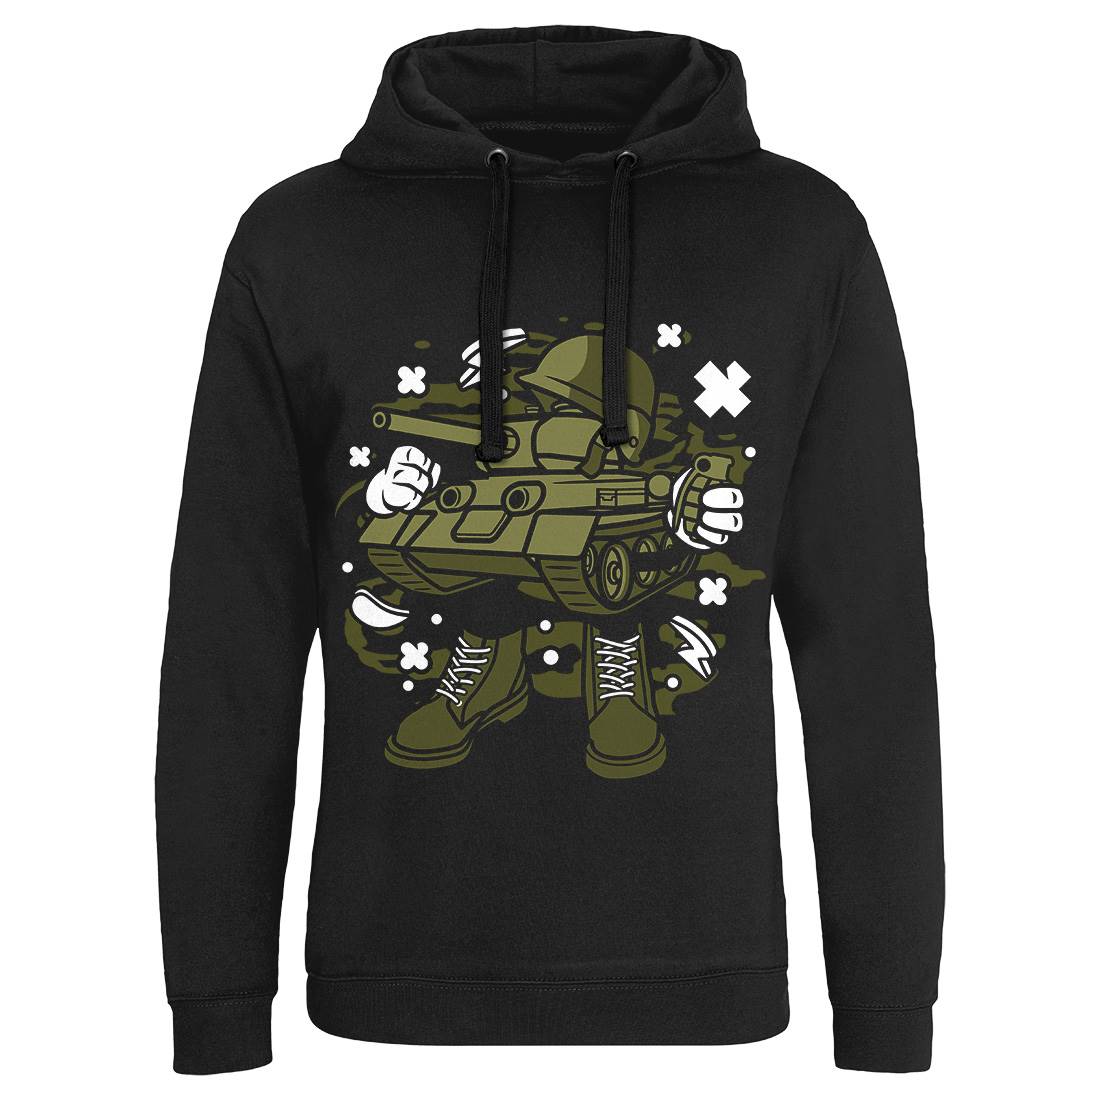 Tank Mens Hoodie Without Pocket Army C270